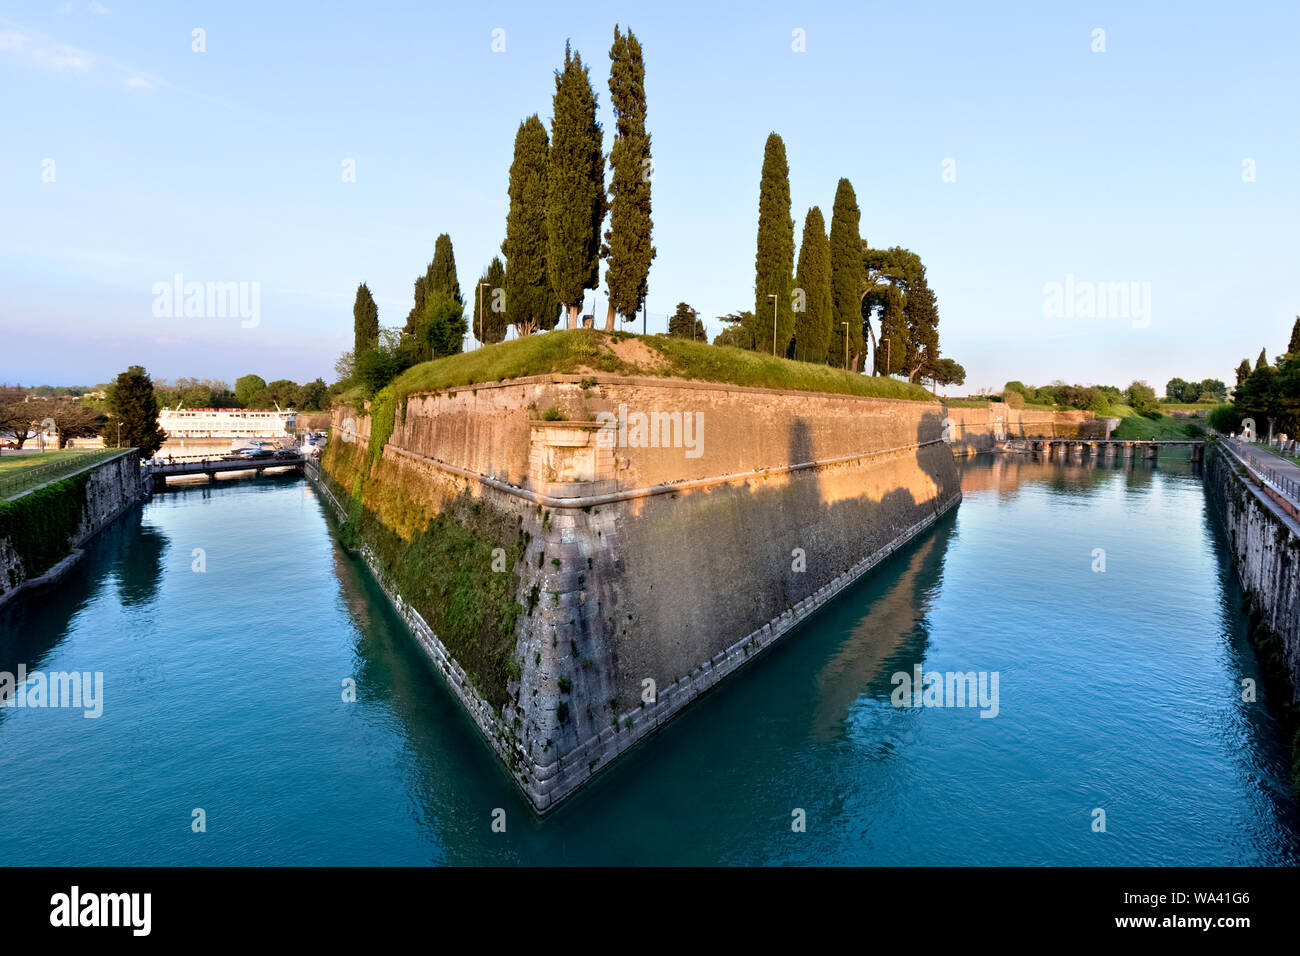 The fortress of Peschiera del Garda was built by the Republic of Venice: today it is a UNESCO World Heritage Site. Verona province, Veneto, Italy. Stock Photo